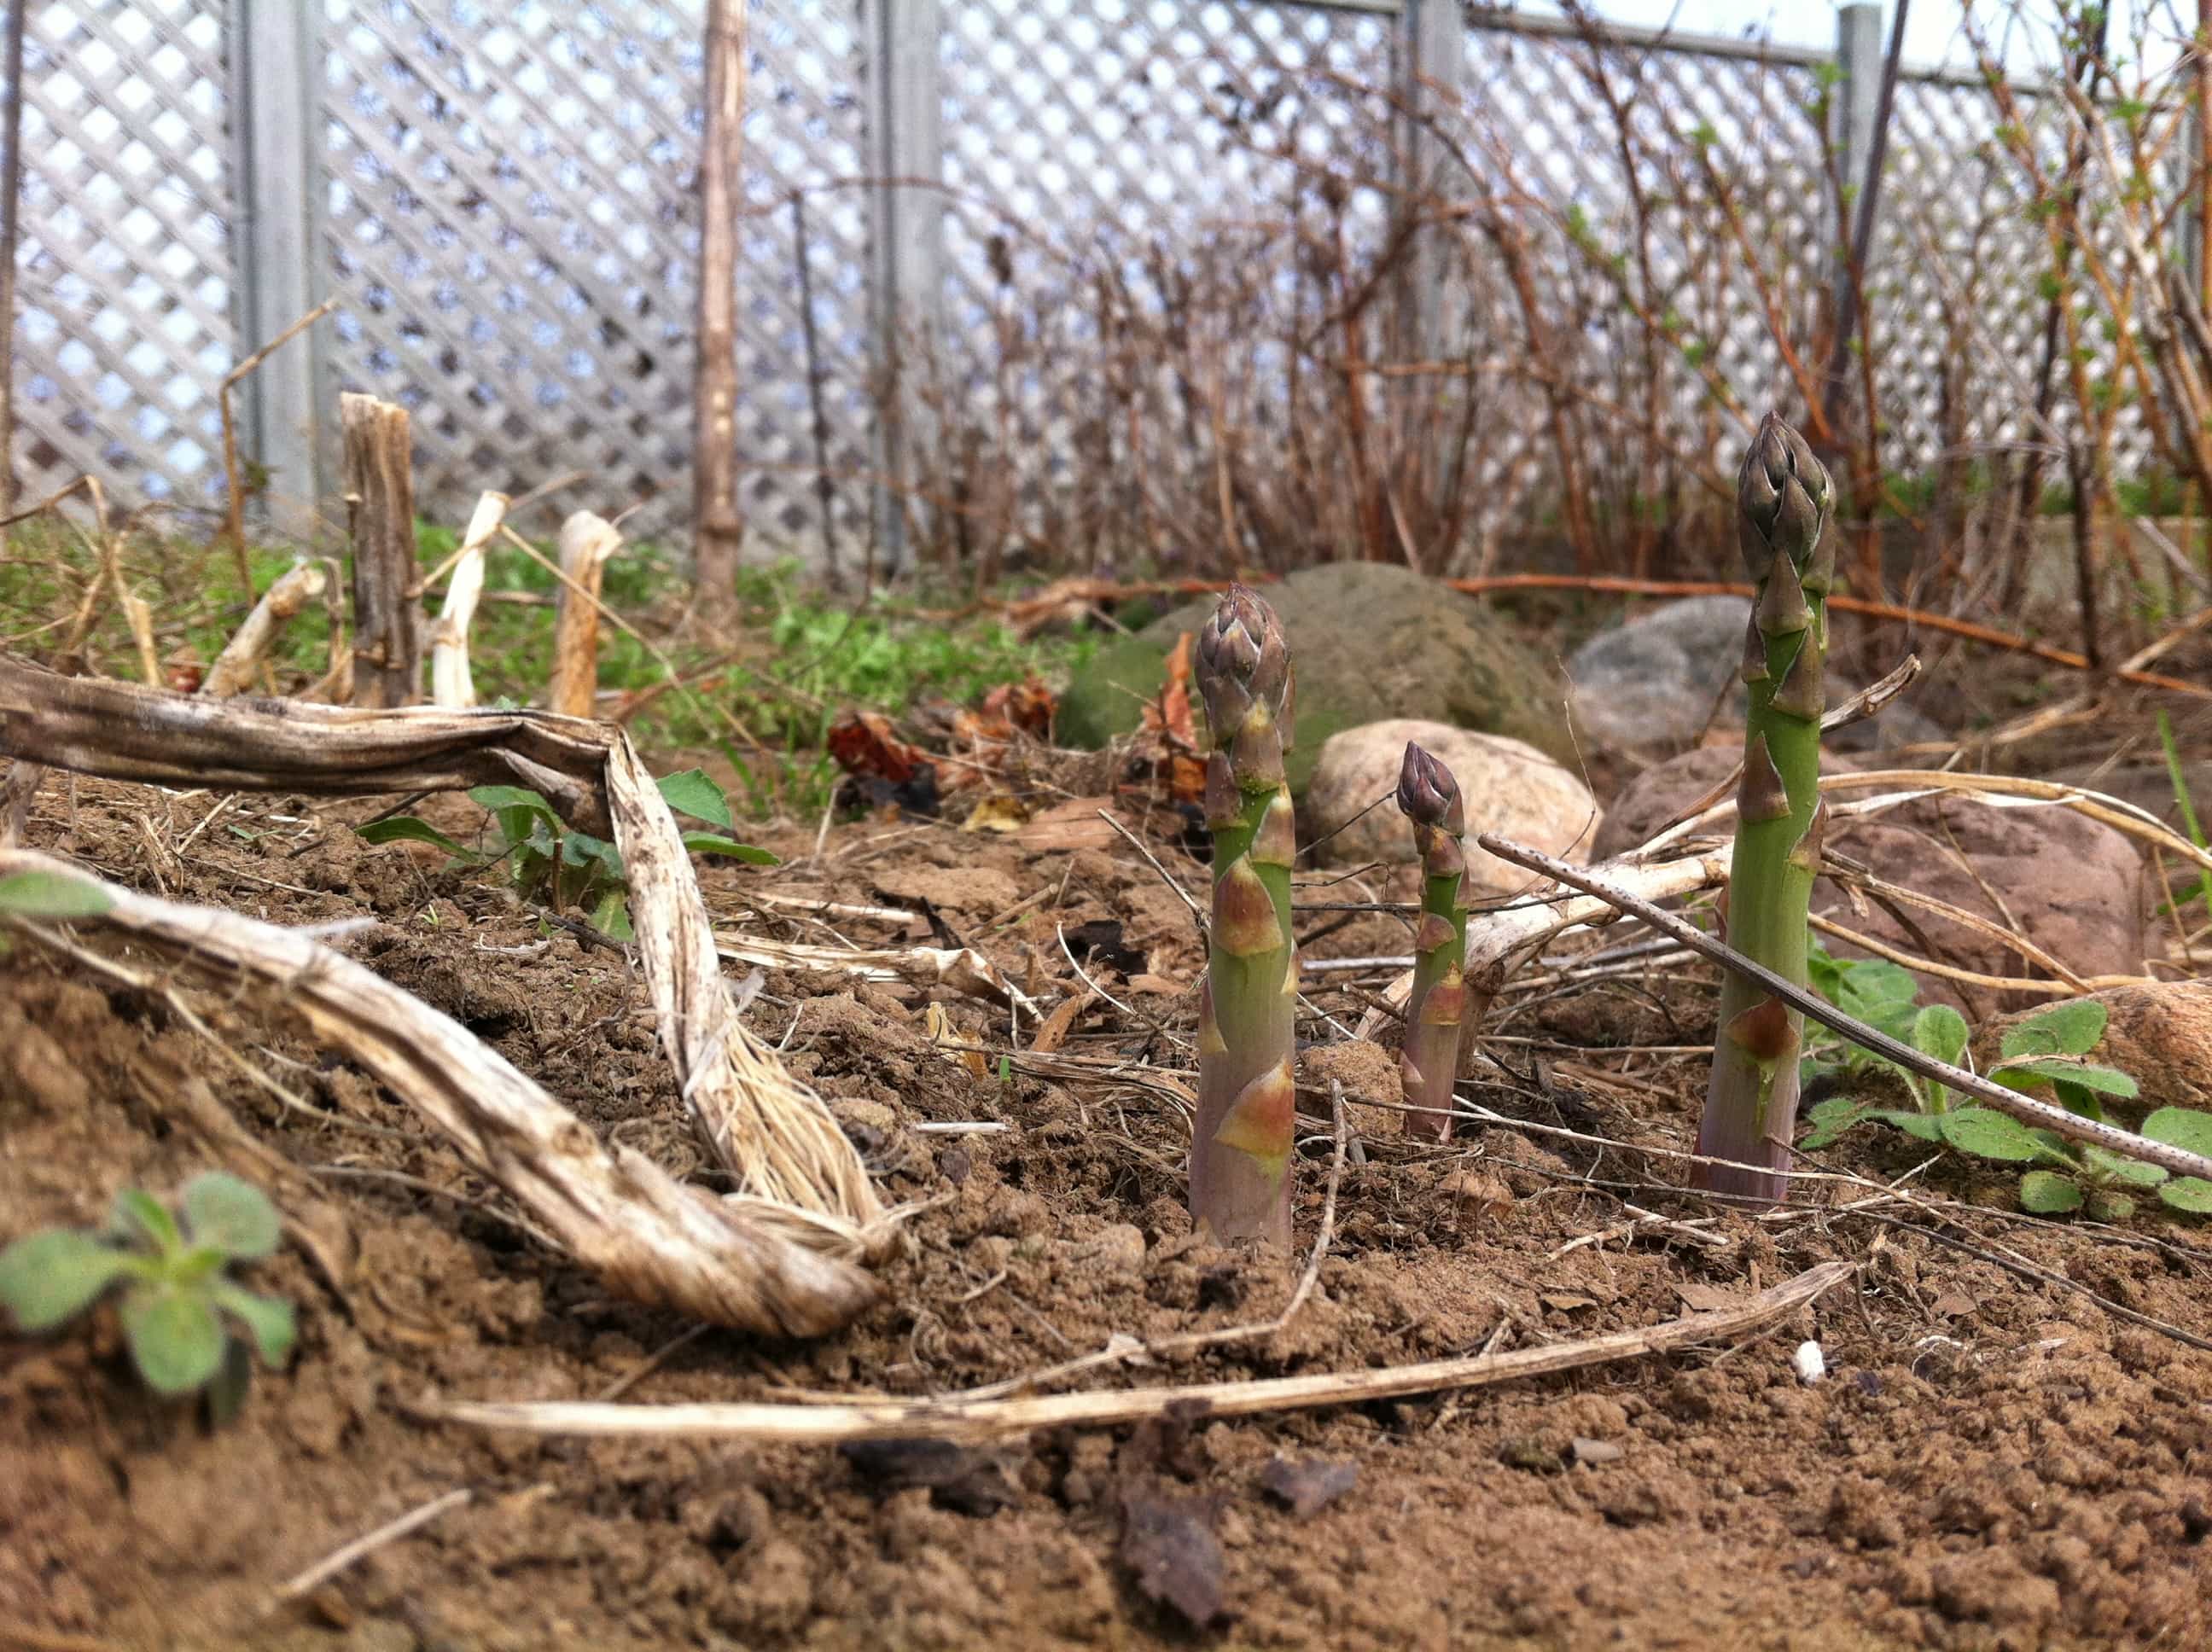 asparagus in March?